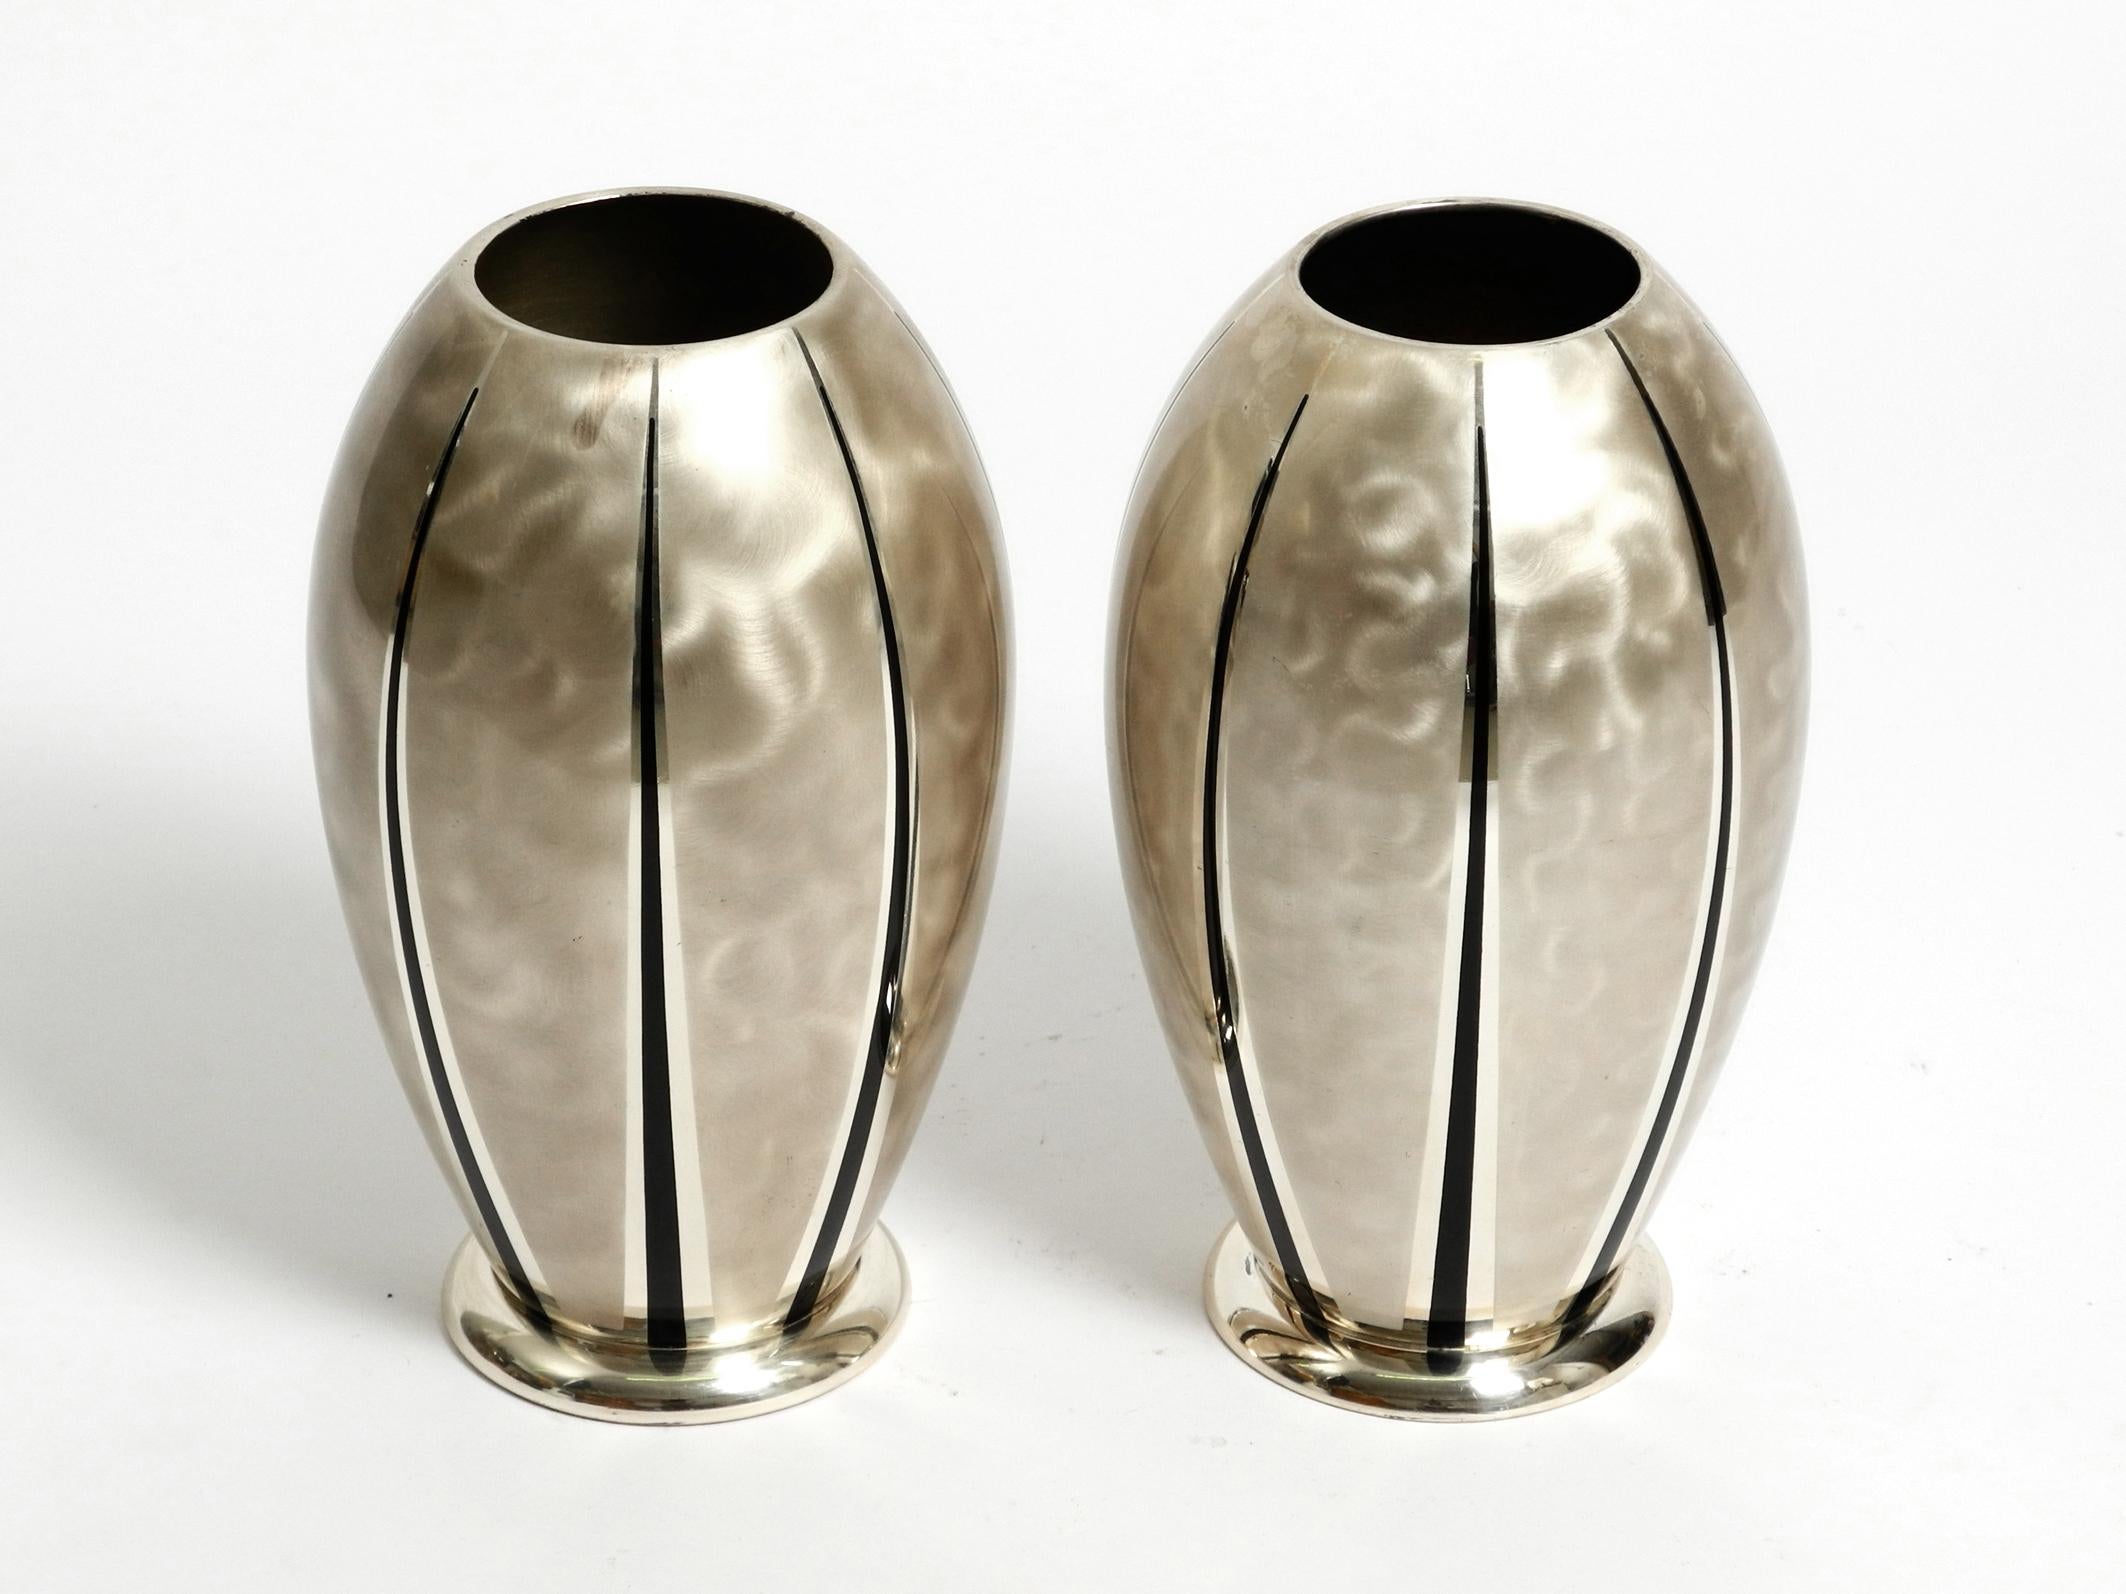 Pair of Mid Century Modern WMF Ikora table vases made of silver-plated brass For Sale 9